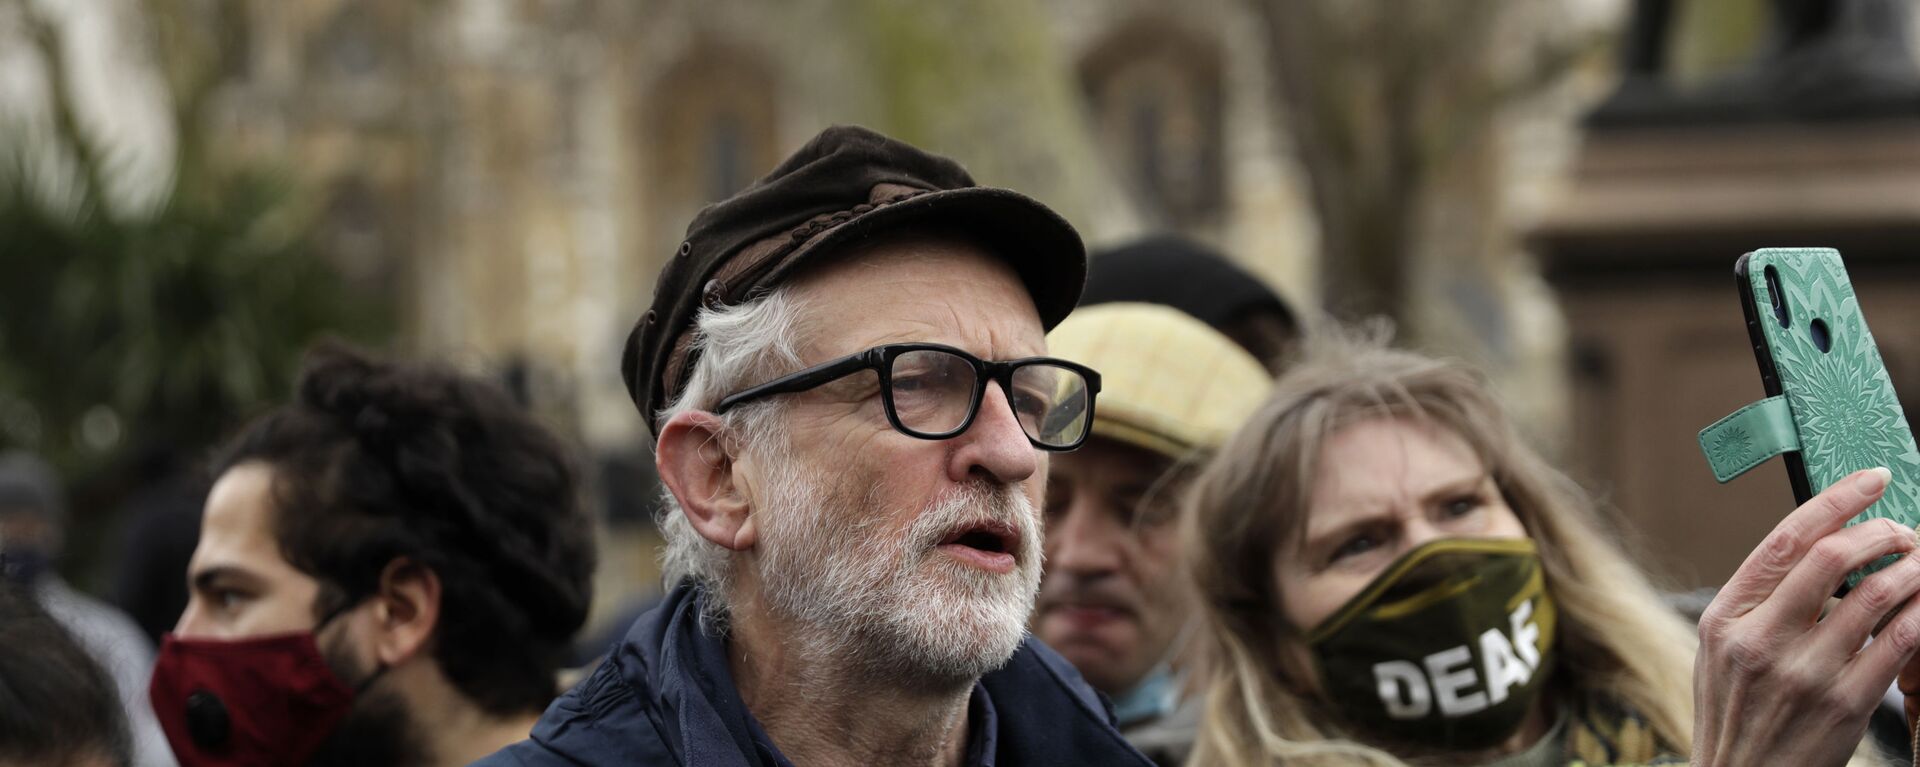 Former Labour party leader Jeremy Corbyn joins demonstrators at Parliament Square during a 'Kill the Bill' protest in London, Saturday, April 3, 2021 - Sputnik International, 1920, 27.11.2021